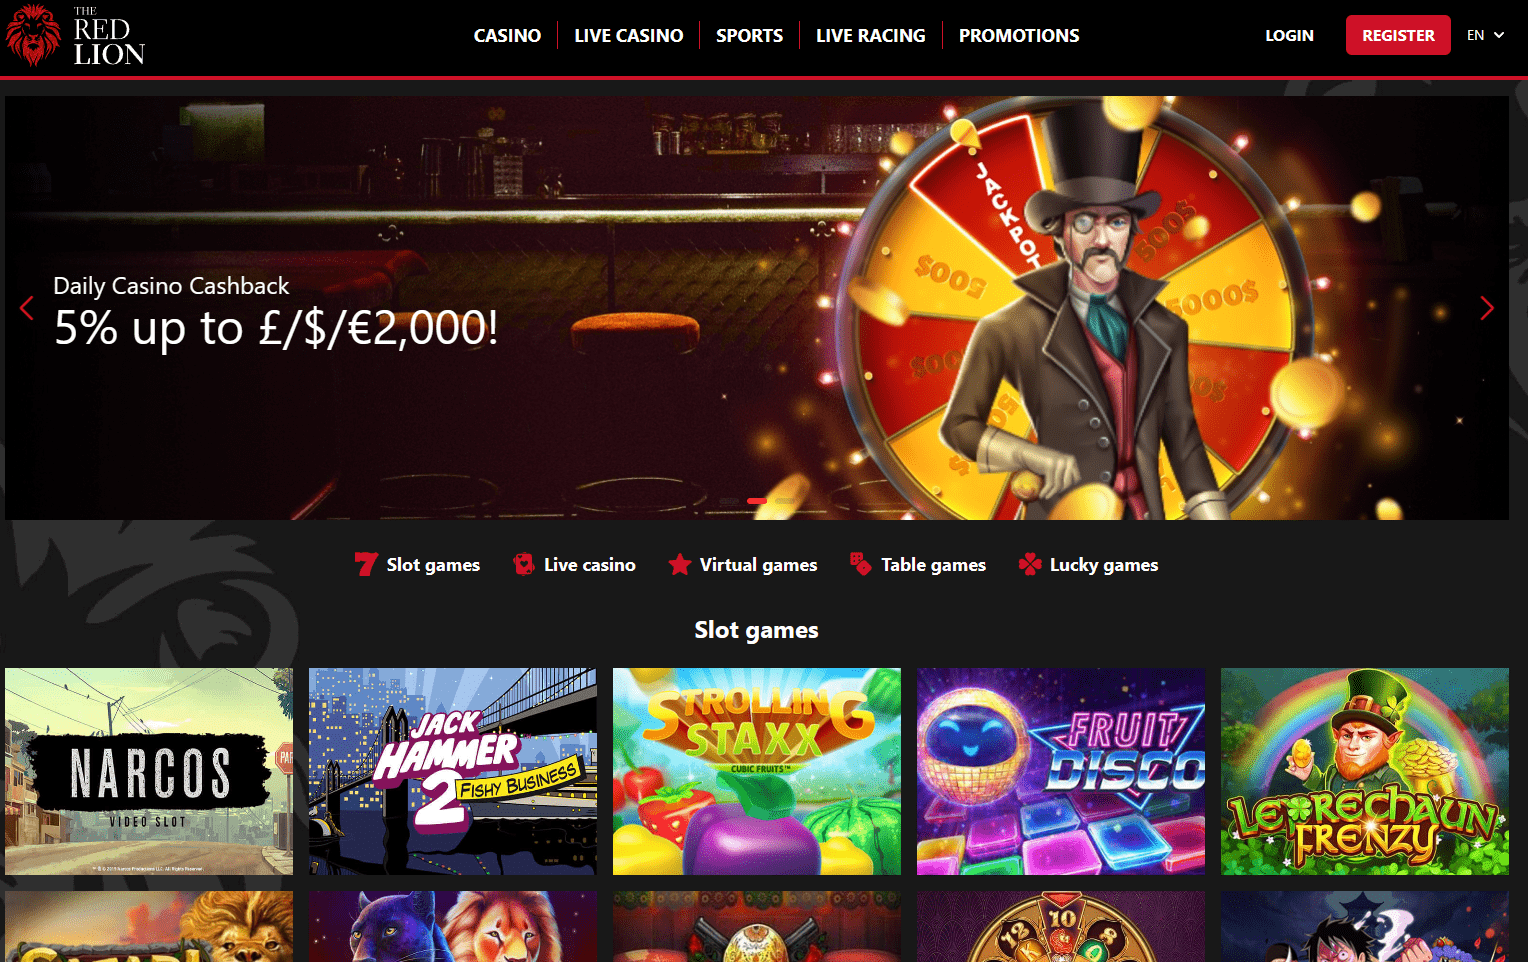 Red Lion casino interface 